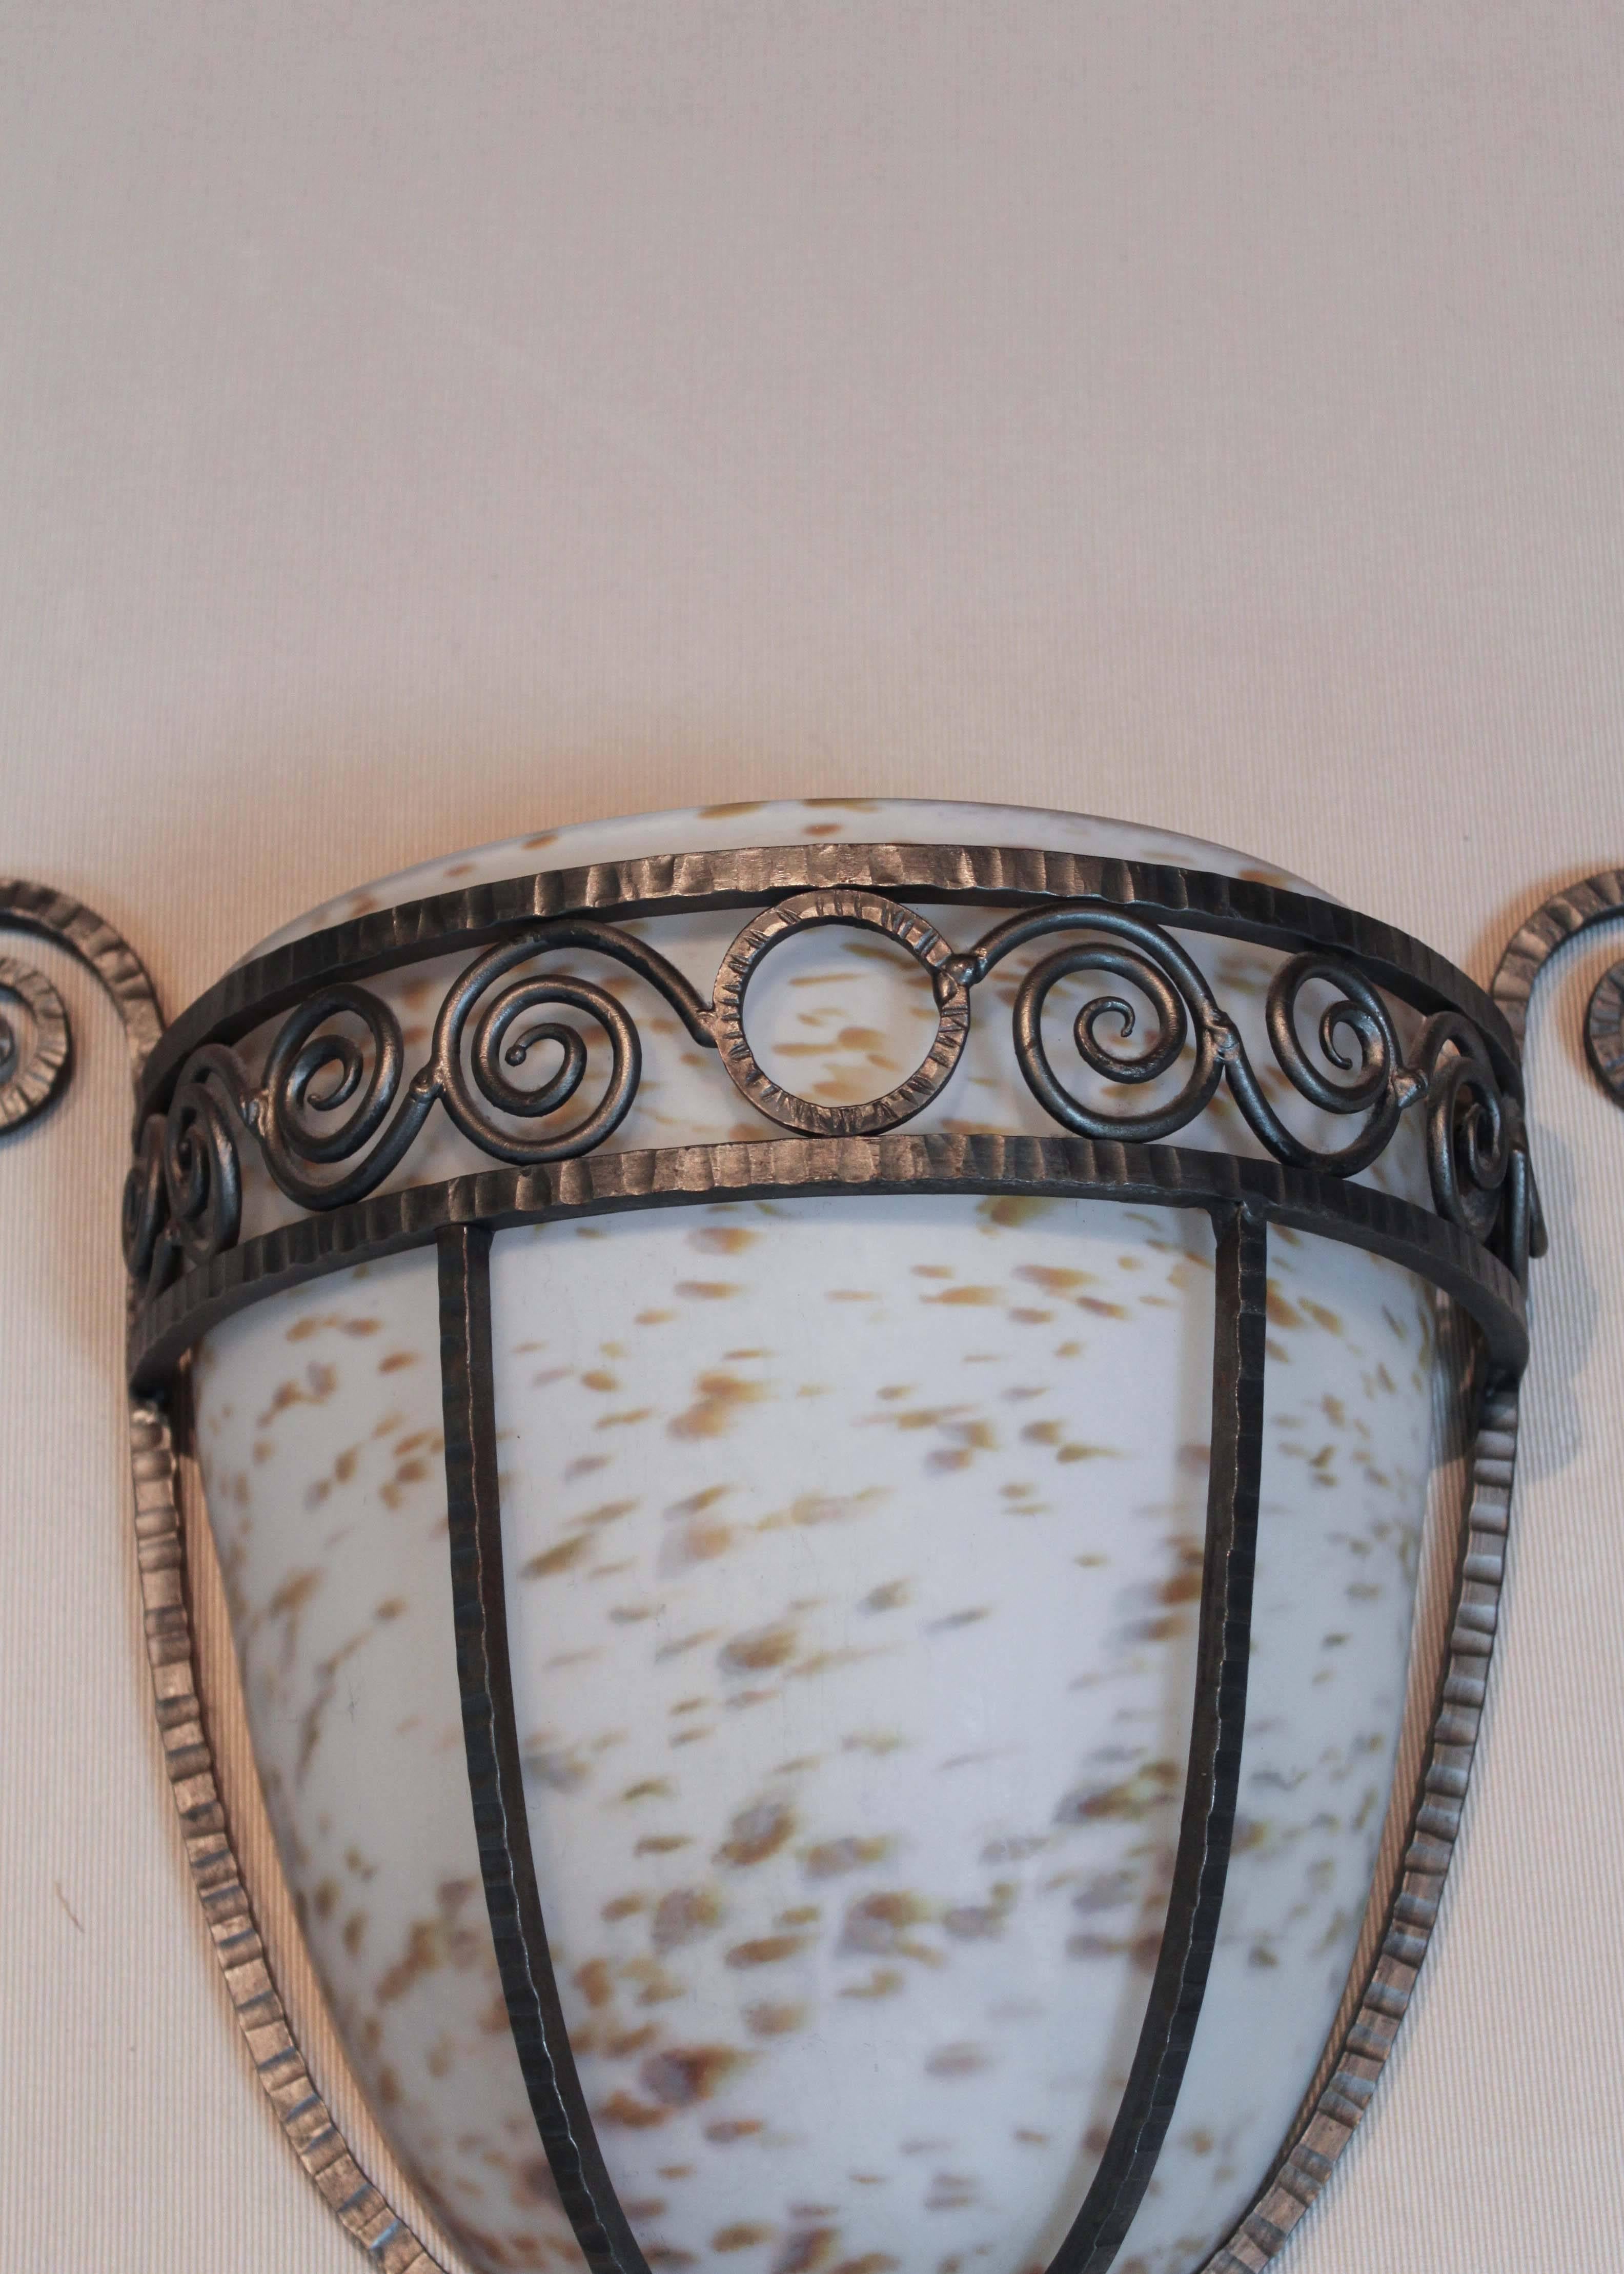 Set of eight hammered wrought iron sconces with speckled milk glass inserts in the style of William Haines. These sconces are not wired, they are meant to be decorative pieces mounted over an existing light source.

The set of eight is comprised